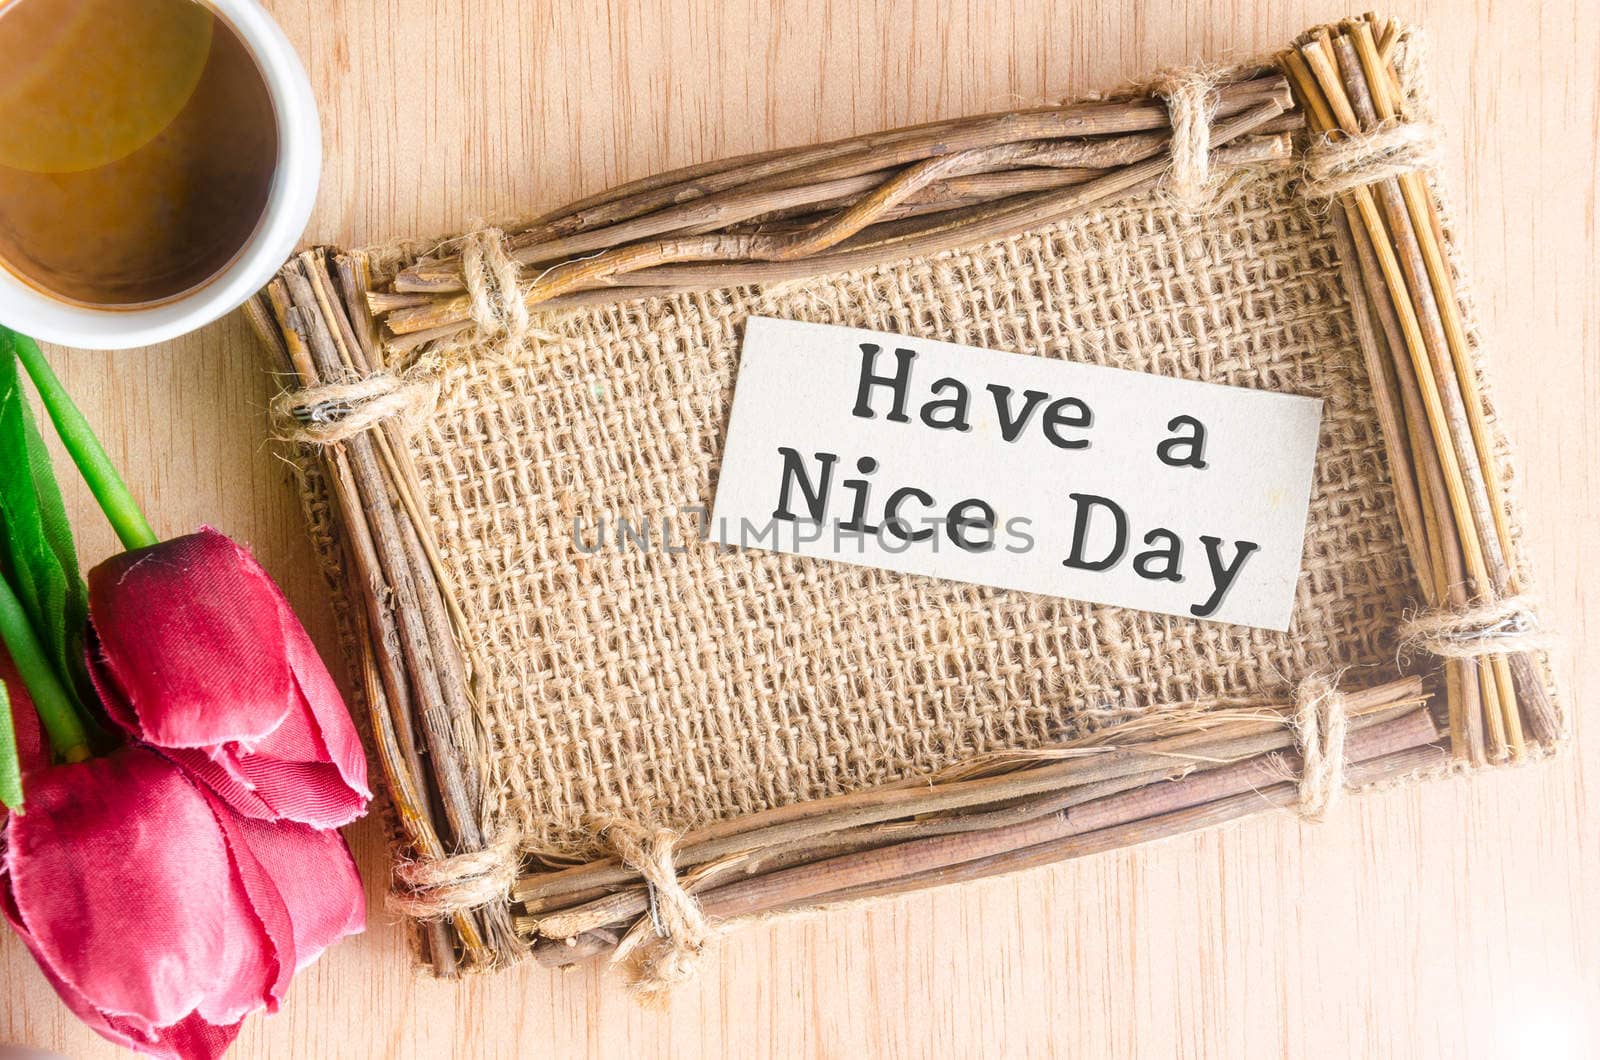 Have a nice day paper tag in sack photo frame and coffee with red tulip on wooden background.